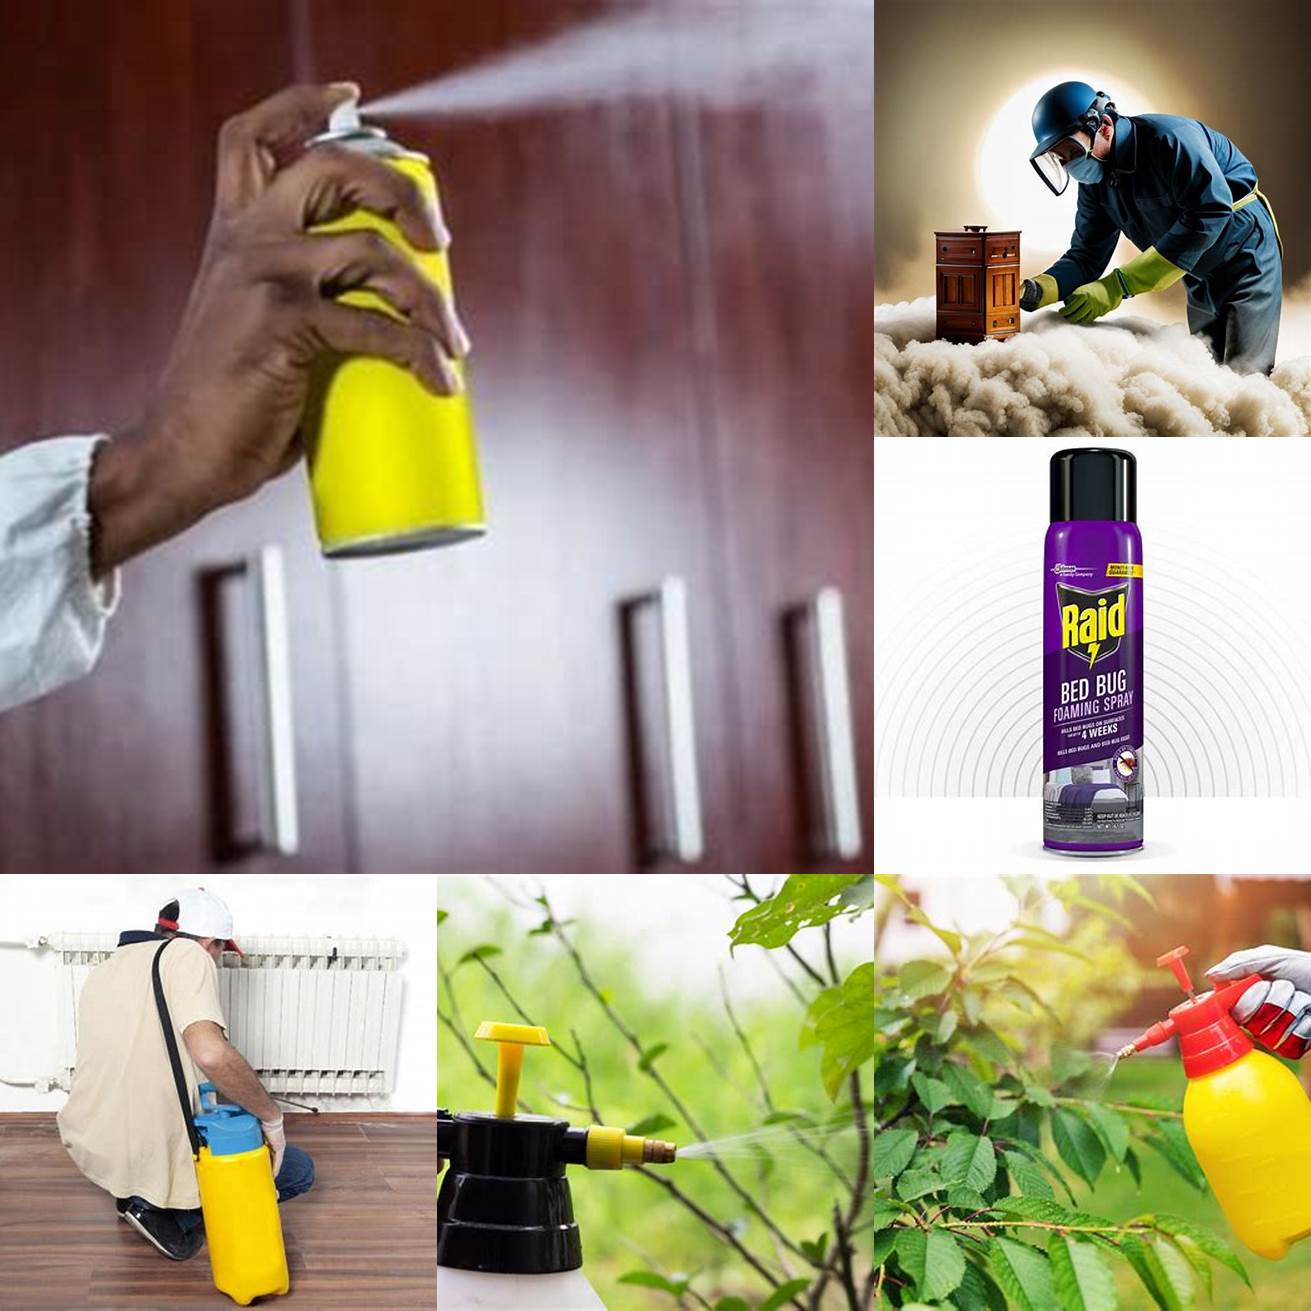 Using insecticides